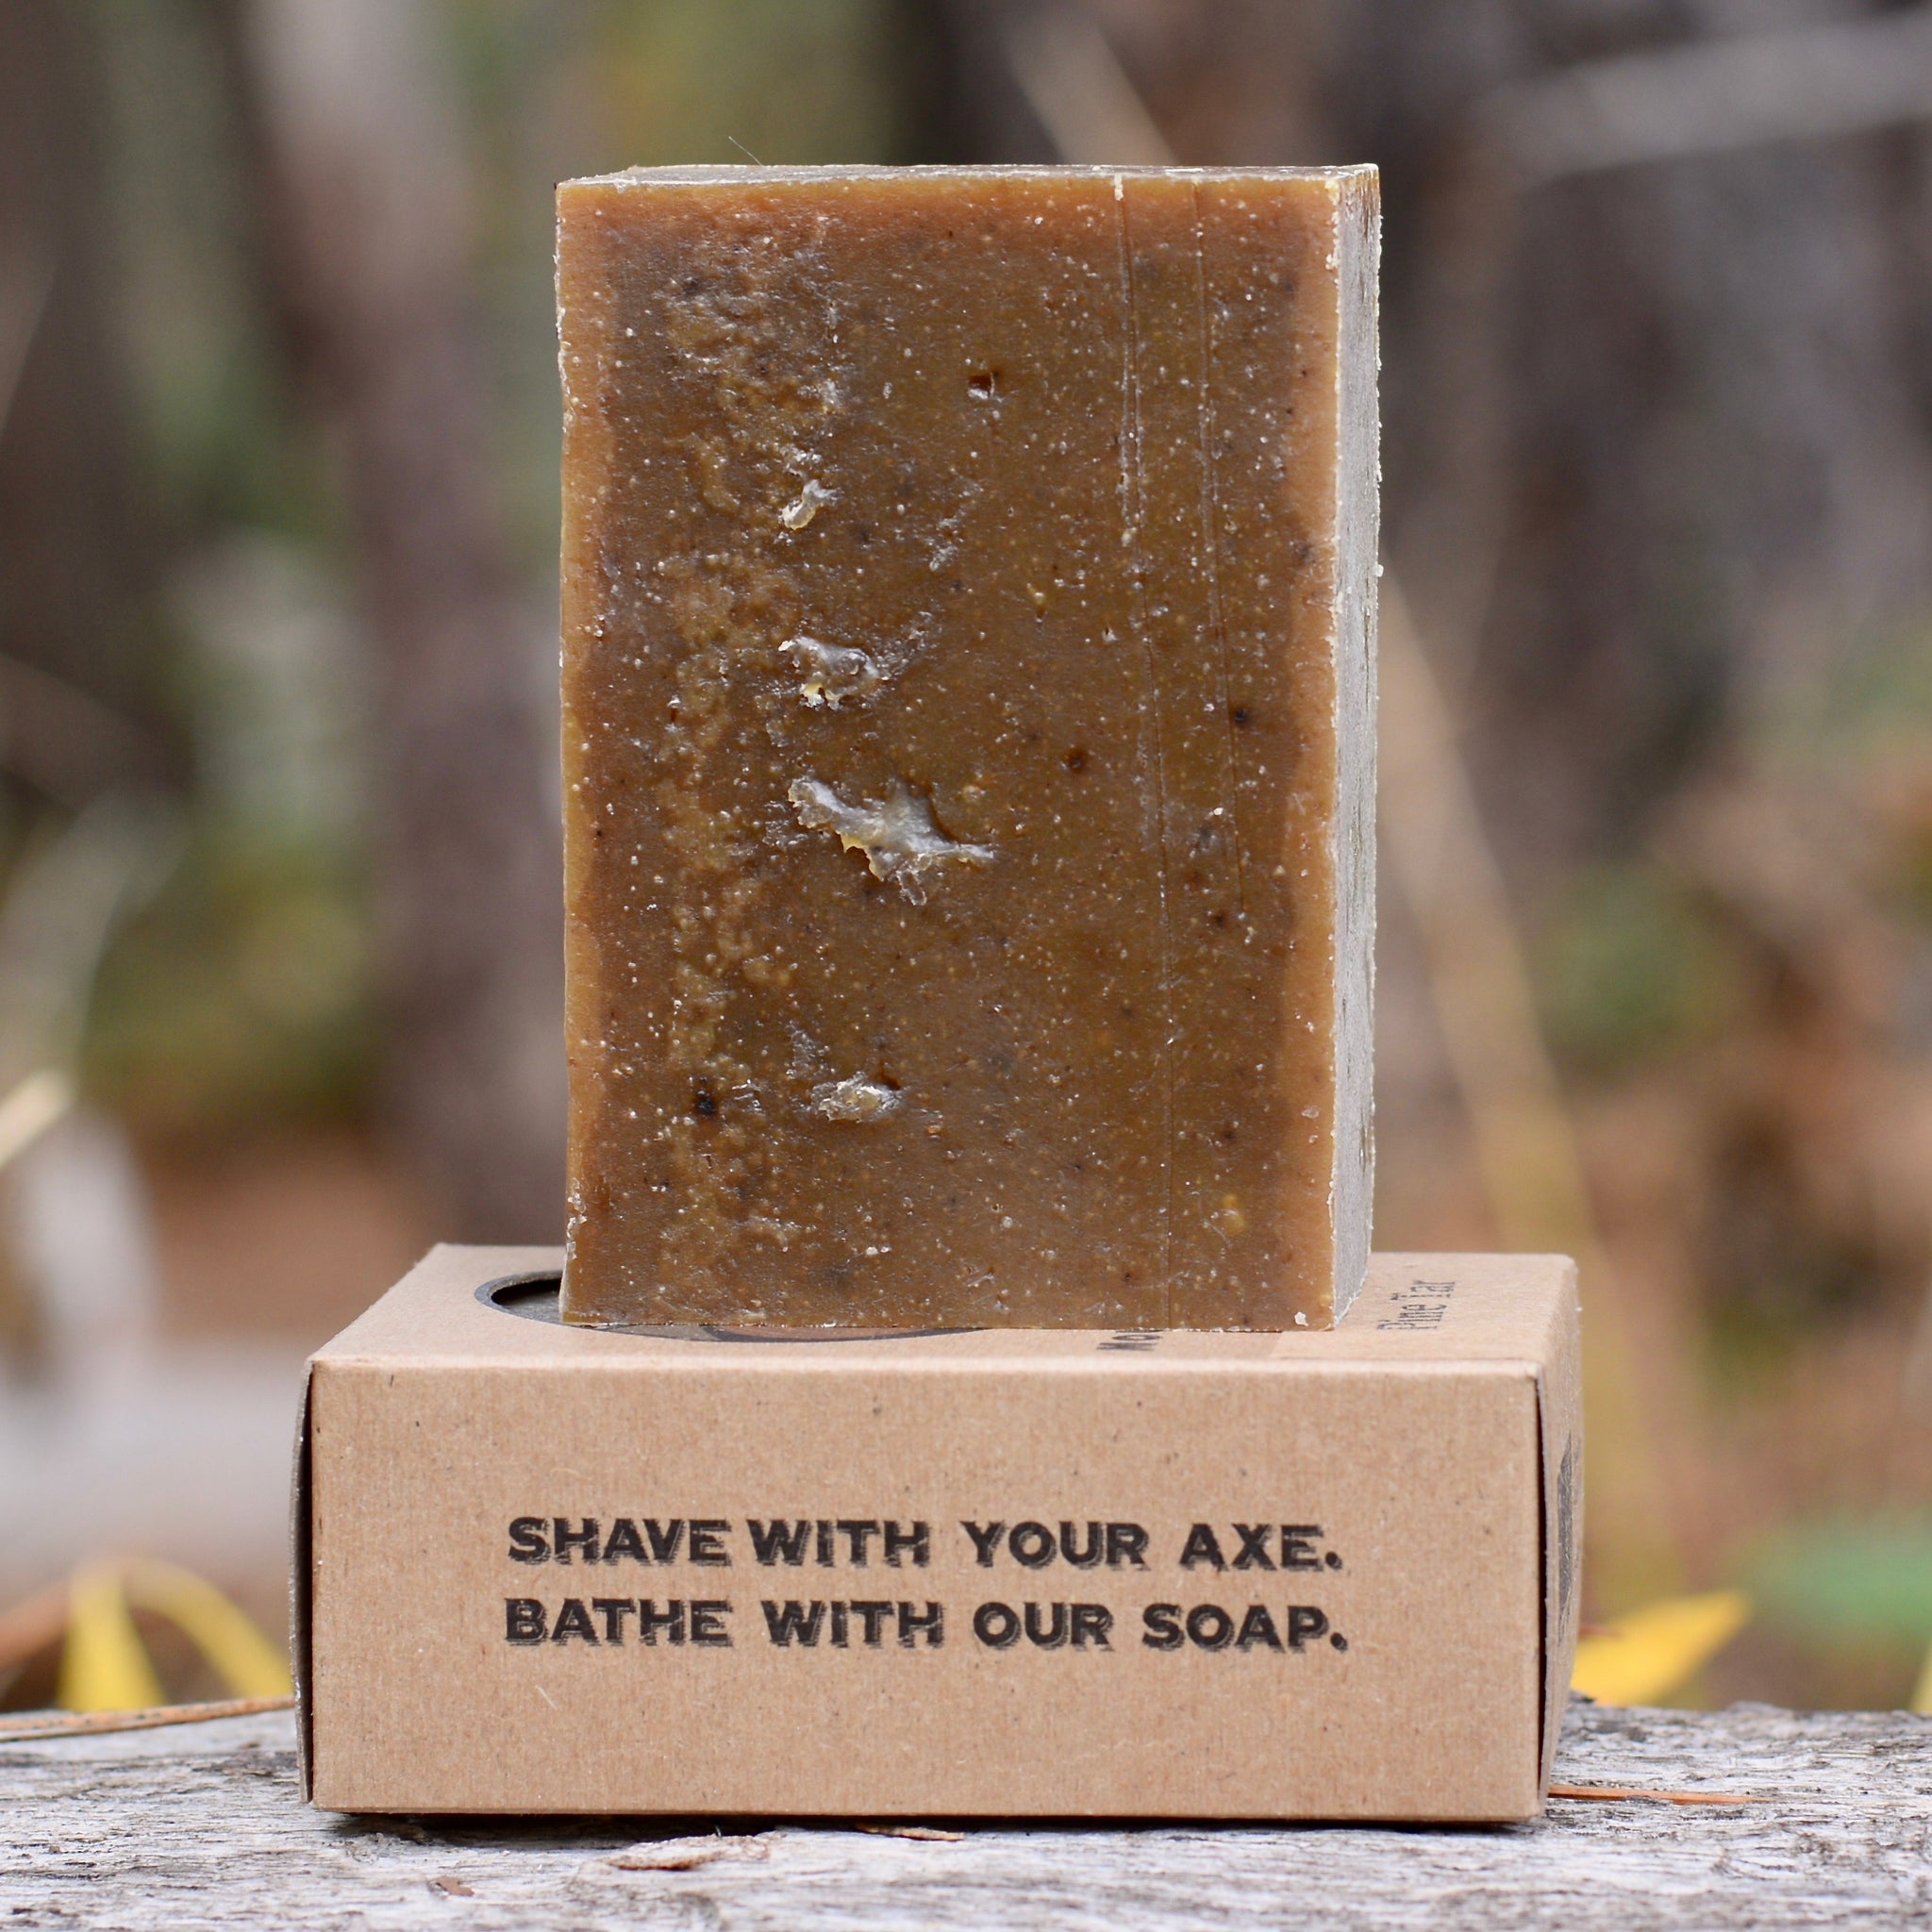 Pine Tar All Natural Soap - Sowing Seeds Hemp Farm